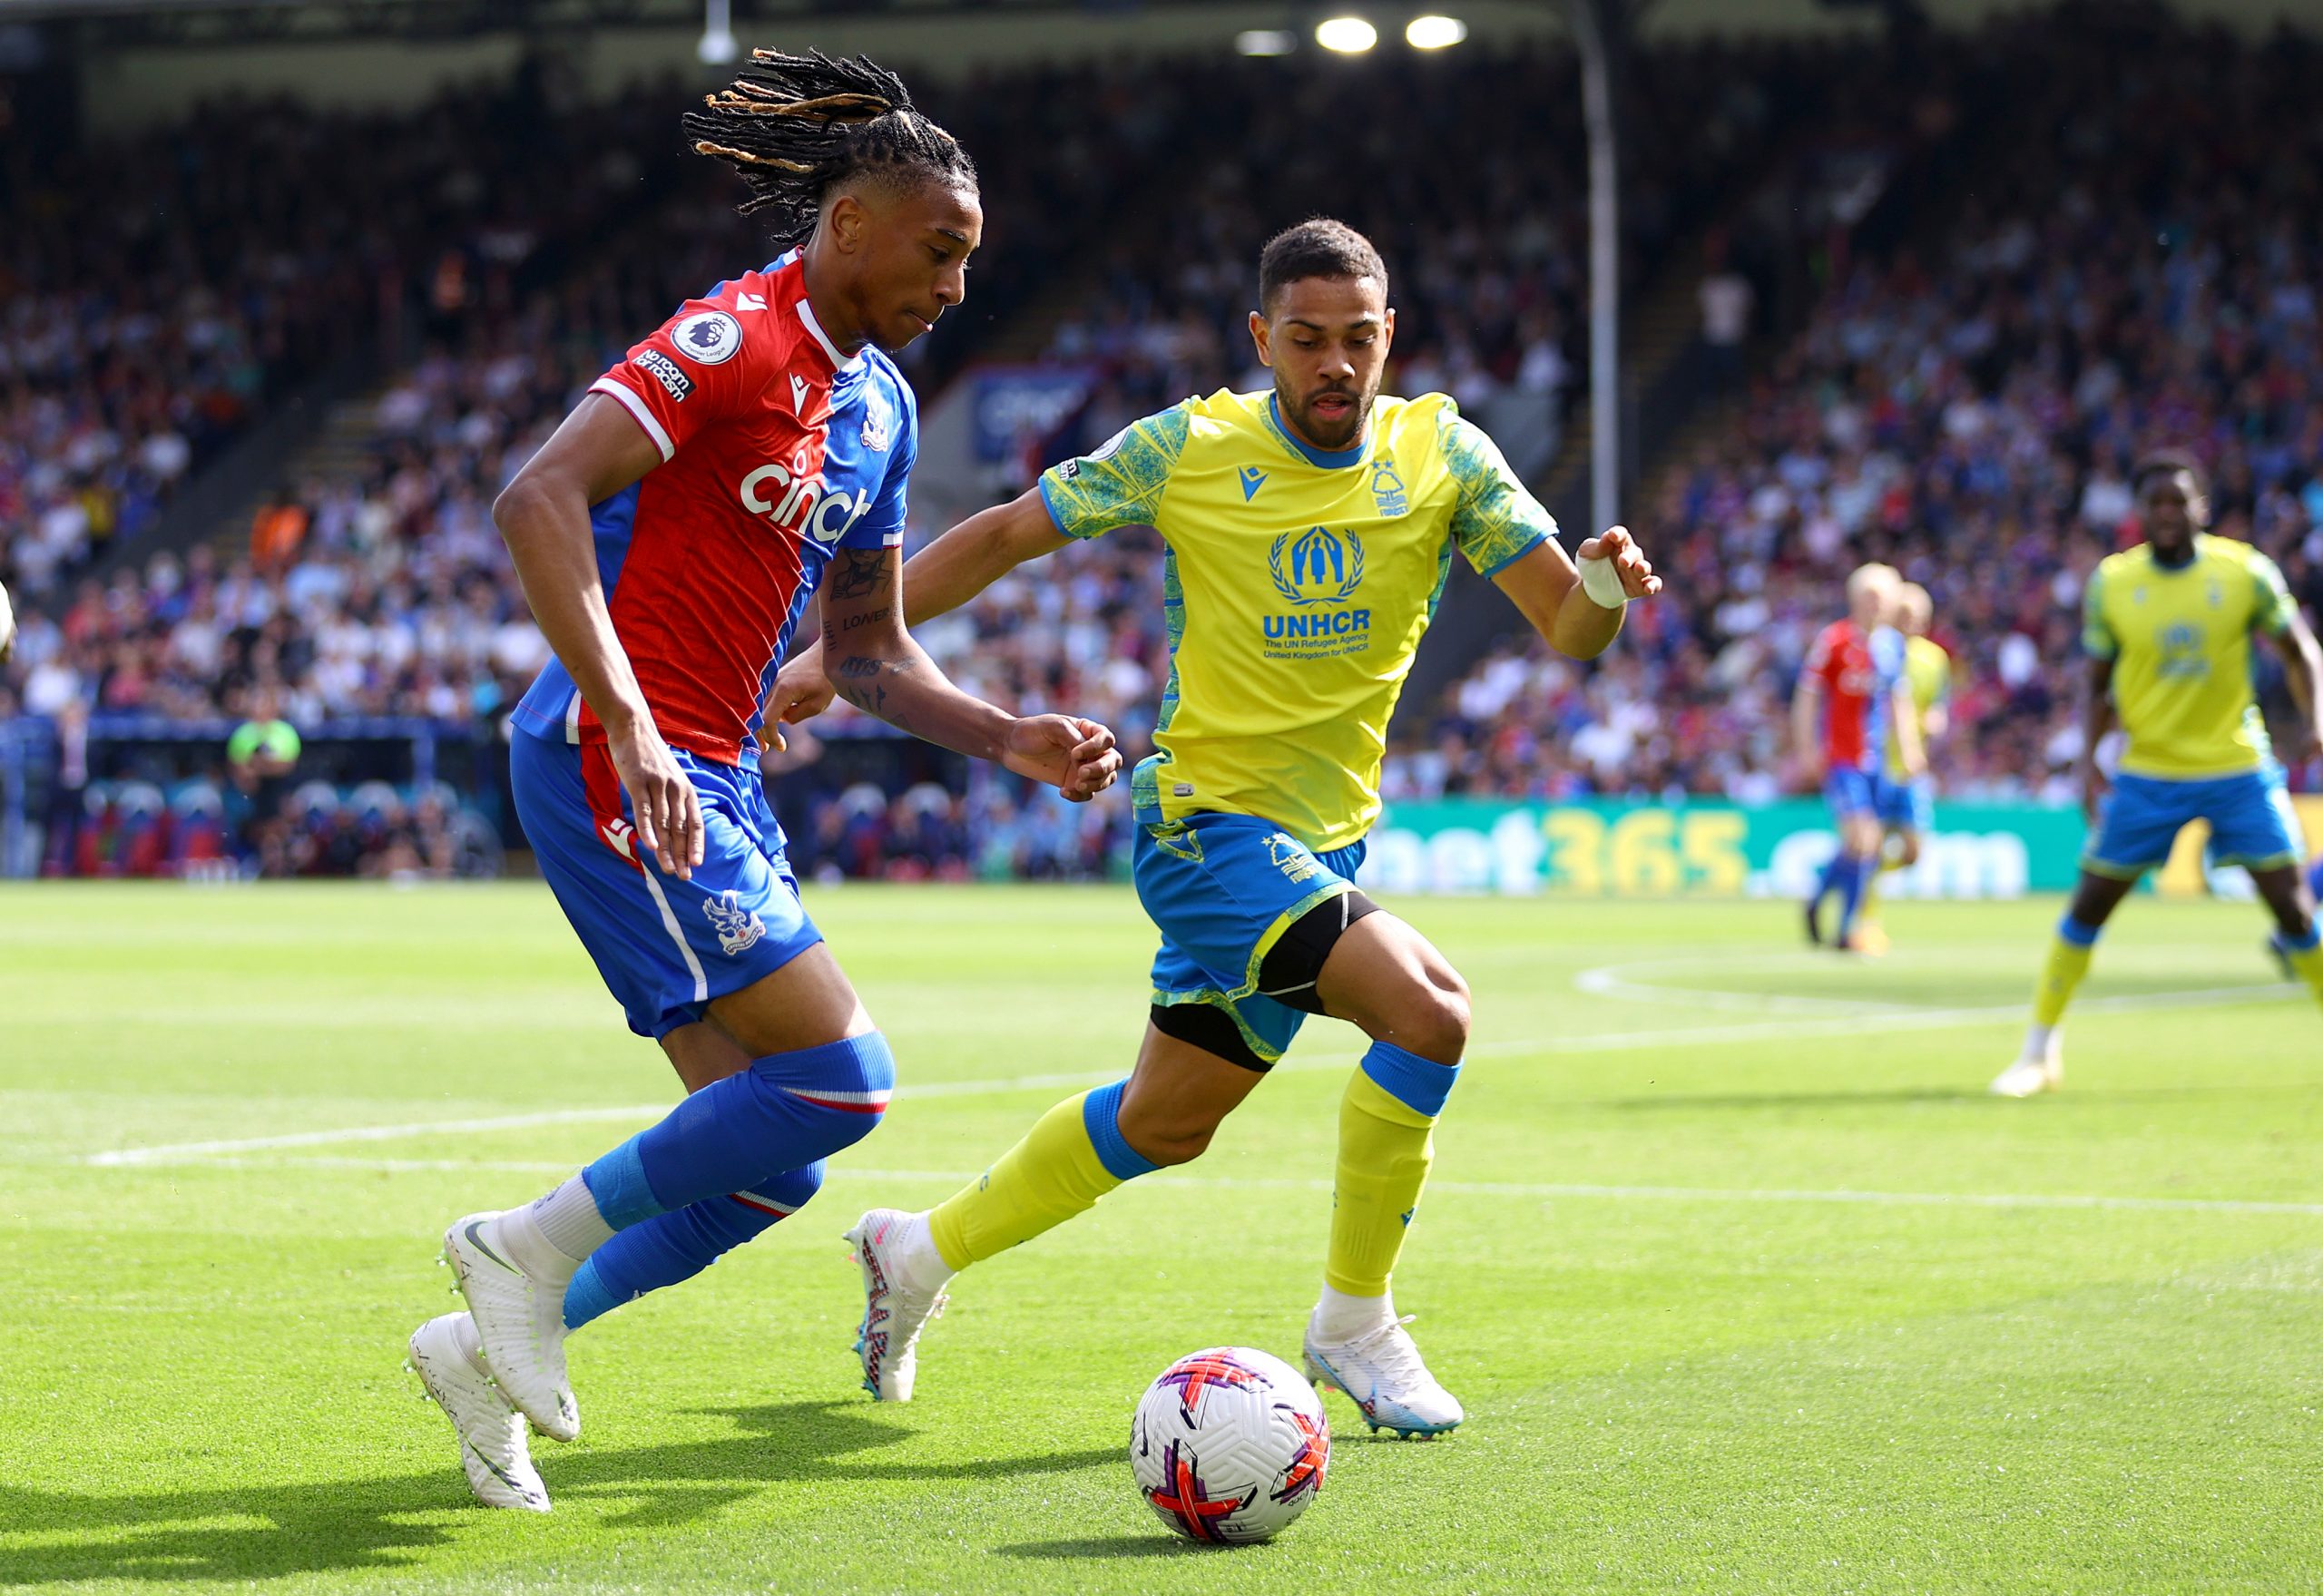 LONDON, ENGLAND - MAY 28: Michael Olise of Crystal Palace and Renan Lodi of Nottingham Forest battle for the ball during the Premier League match between Crystal Palace and Nottingham Forest at Selhurst Park on May 28, 2023 in London, England. (Photo by Richard Heathcote/Getty Images)